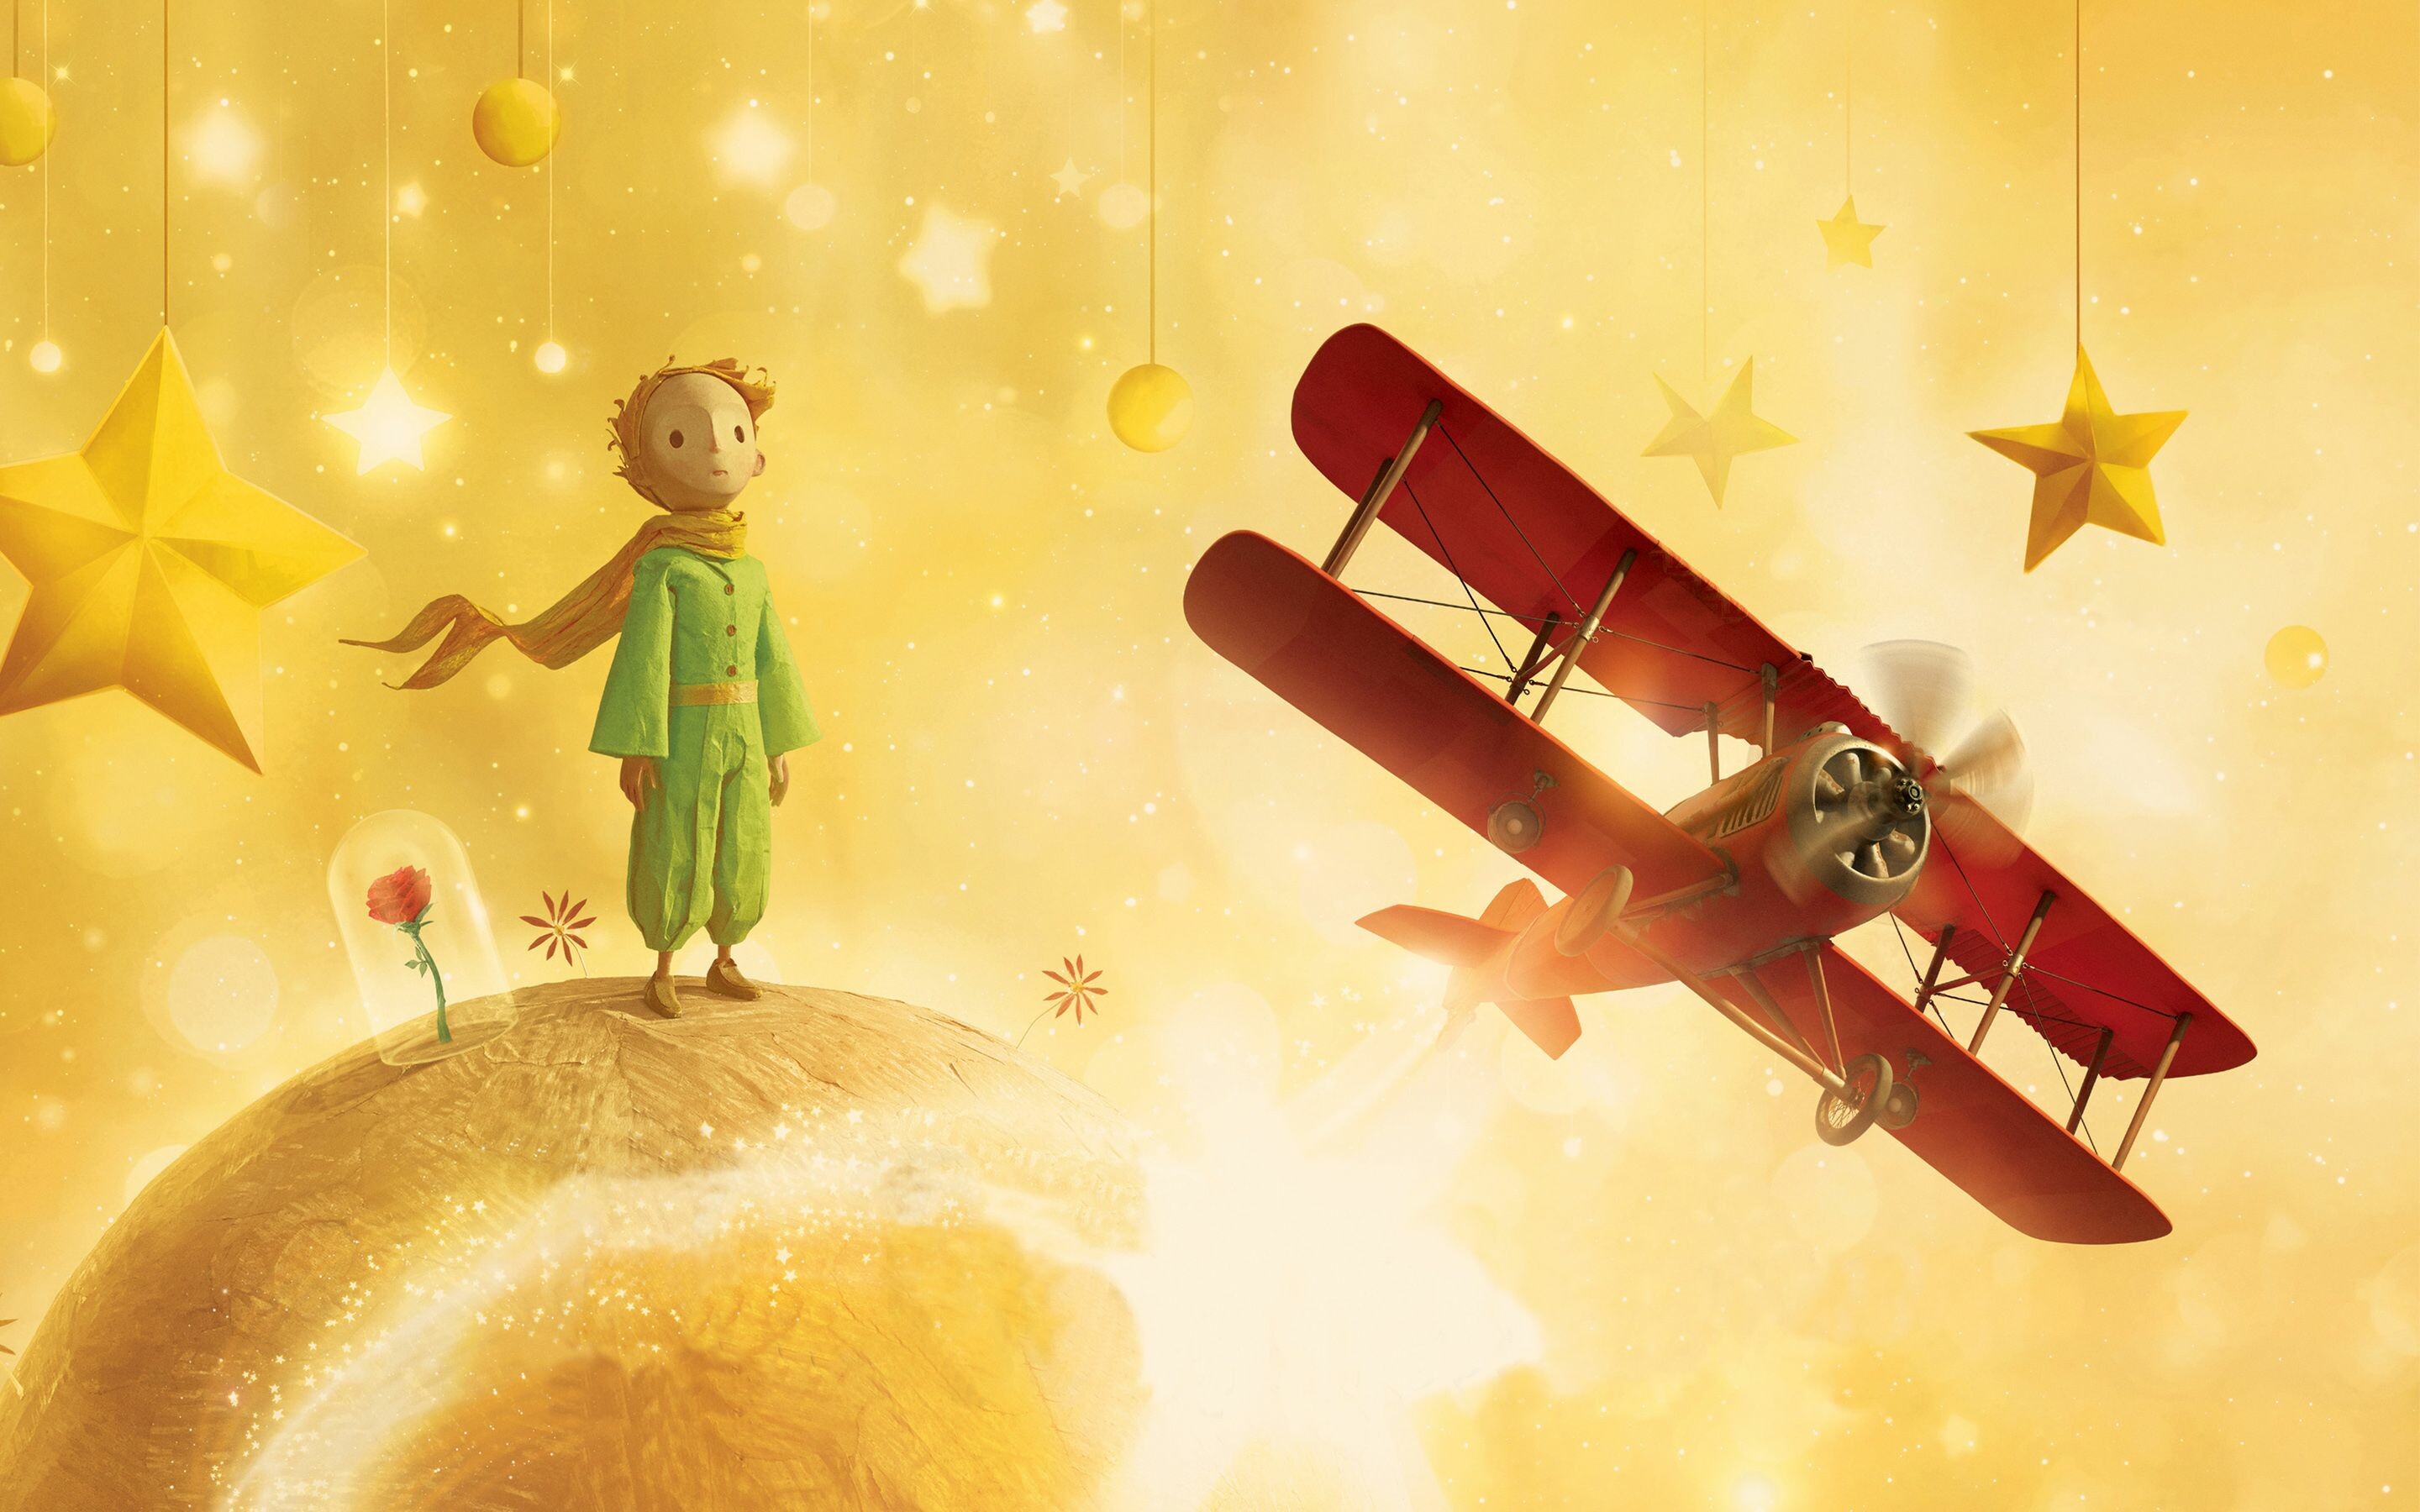 The Little Prince: The film premiered on 22 May 2015 at the 68th Cannes Film Festival in an out-of-competition screening, followed by a wide release in France on 29 July by Paramount Pictures. 2880x1800 HD Wallpaper.